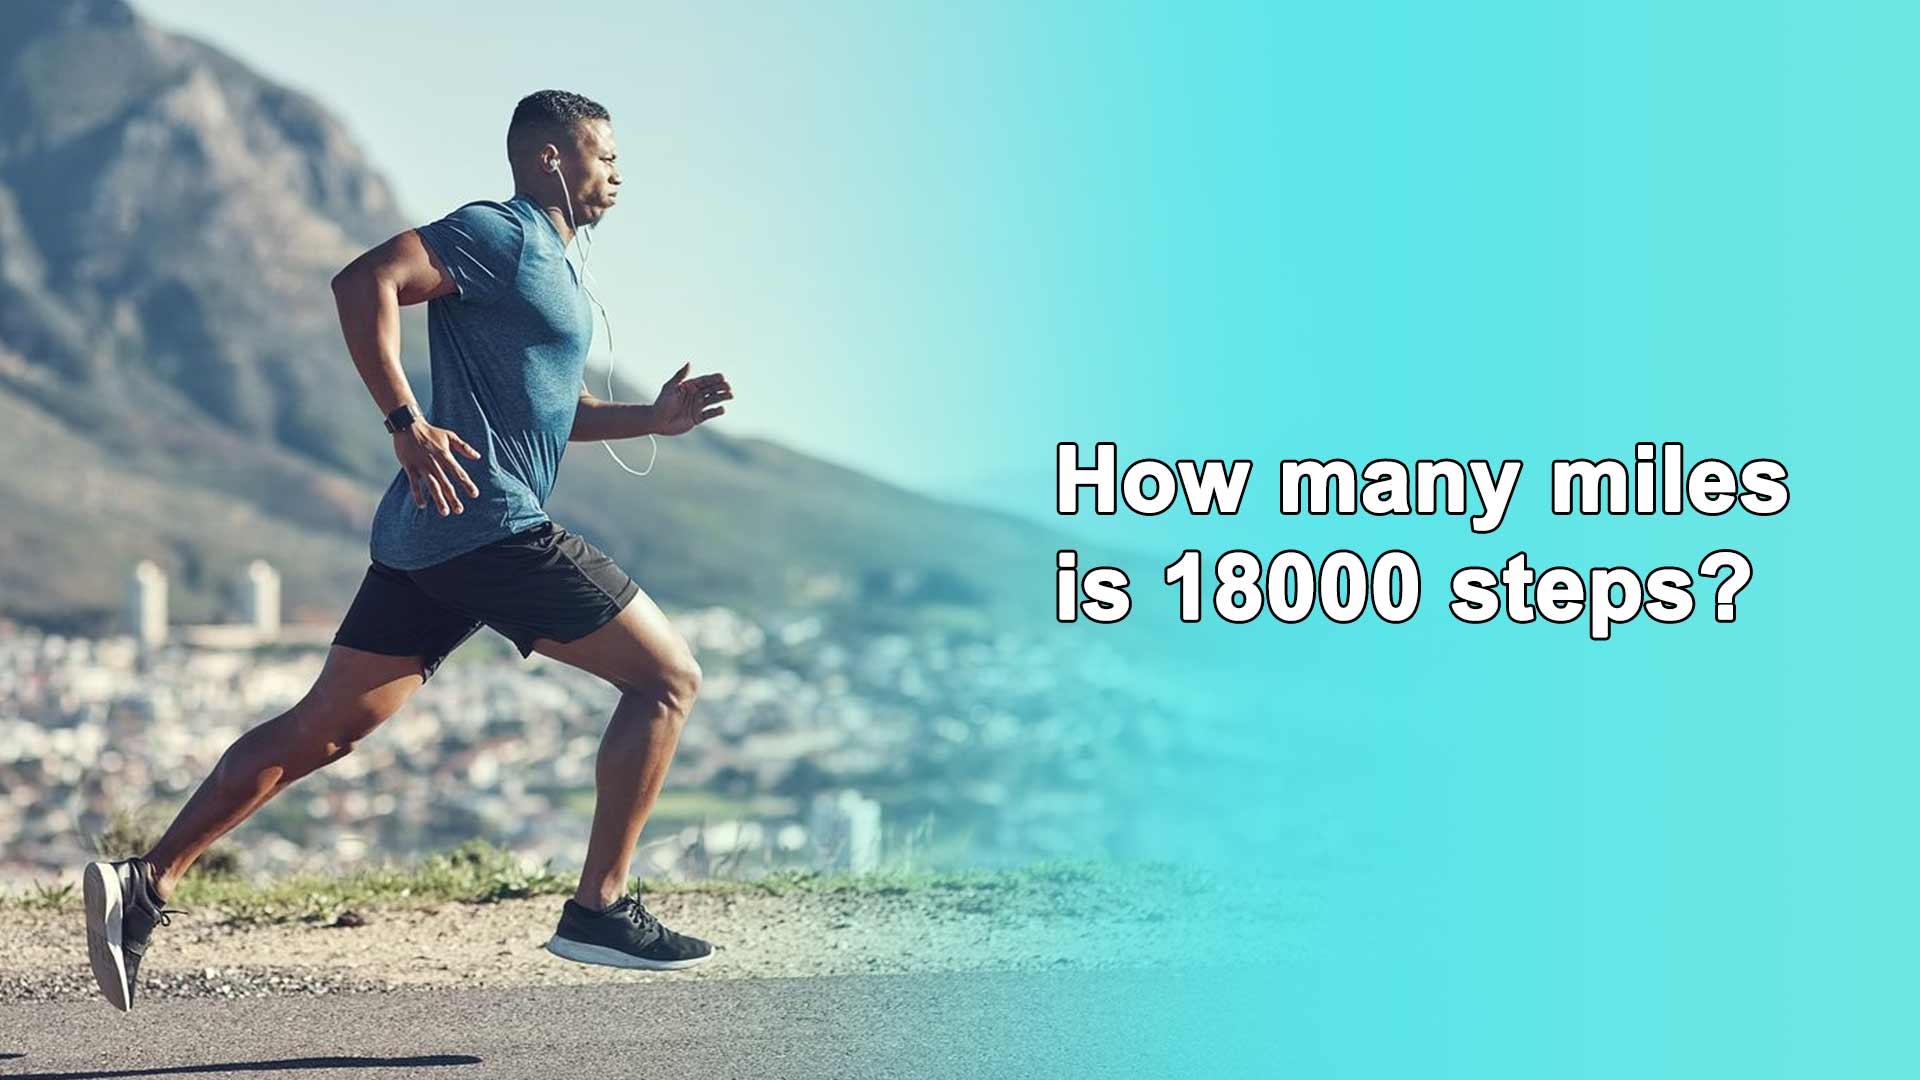 How many miles is 18000 steps